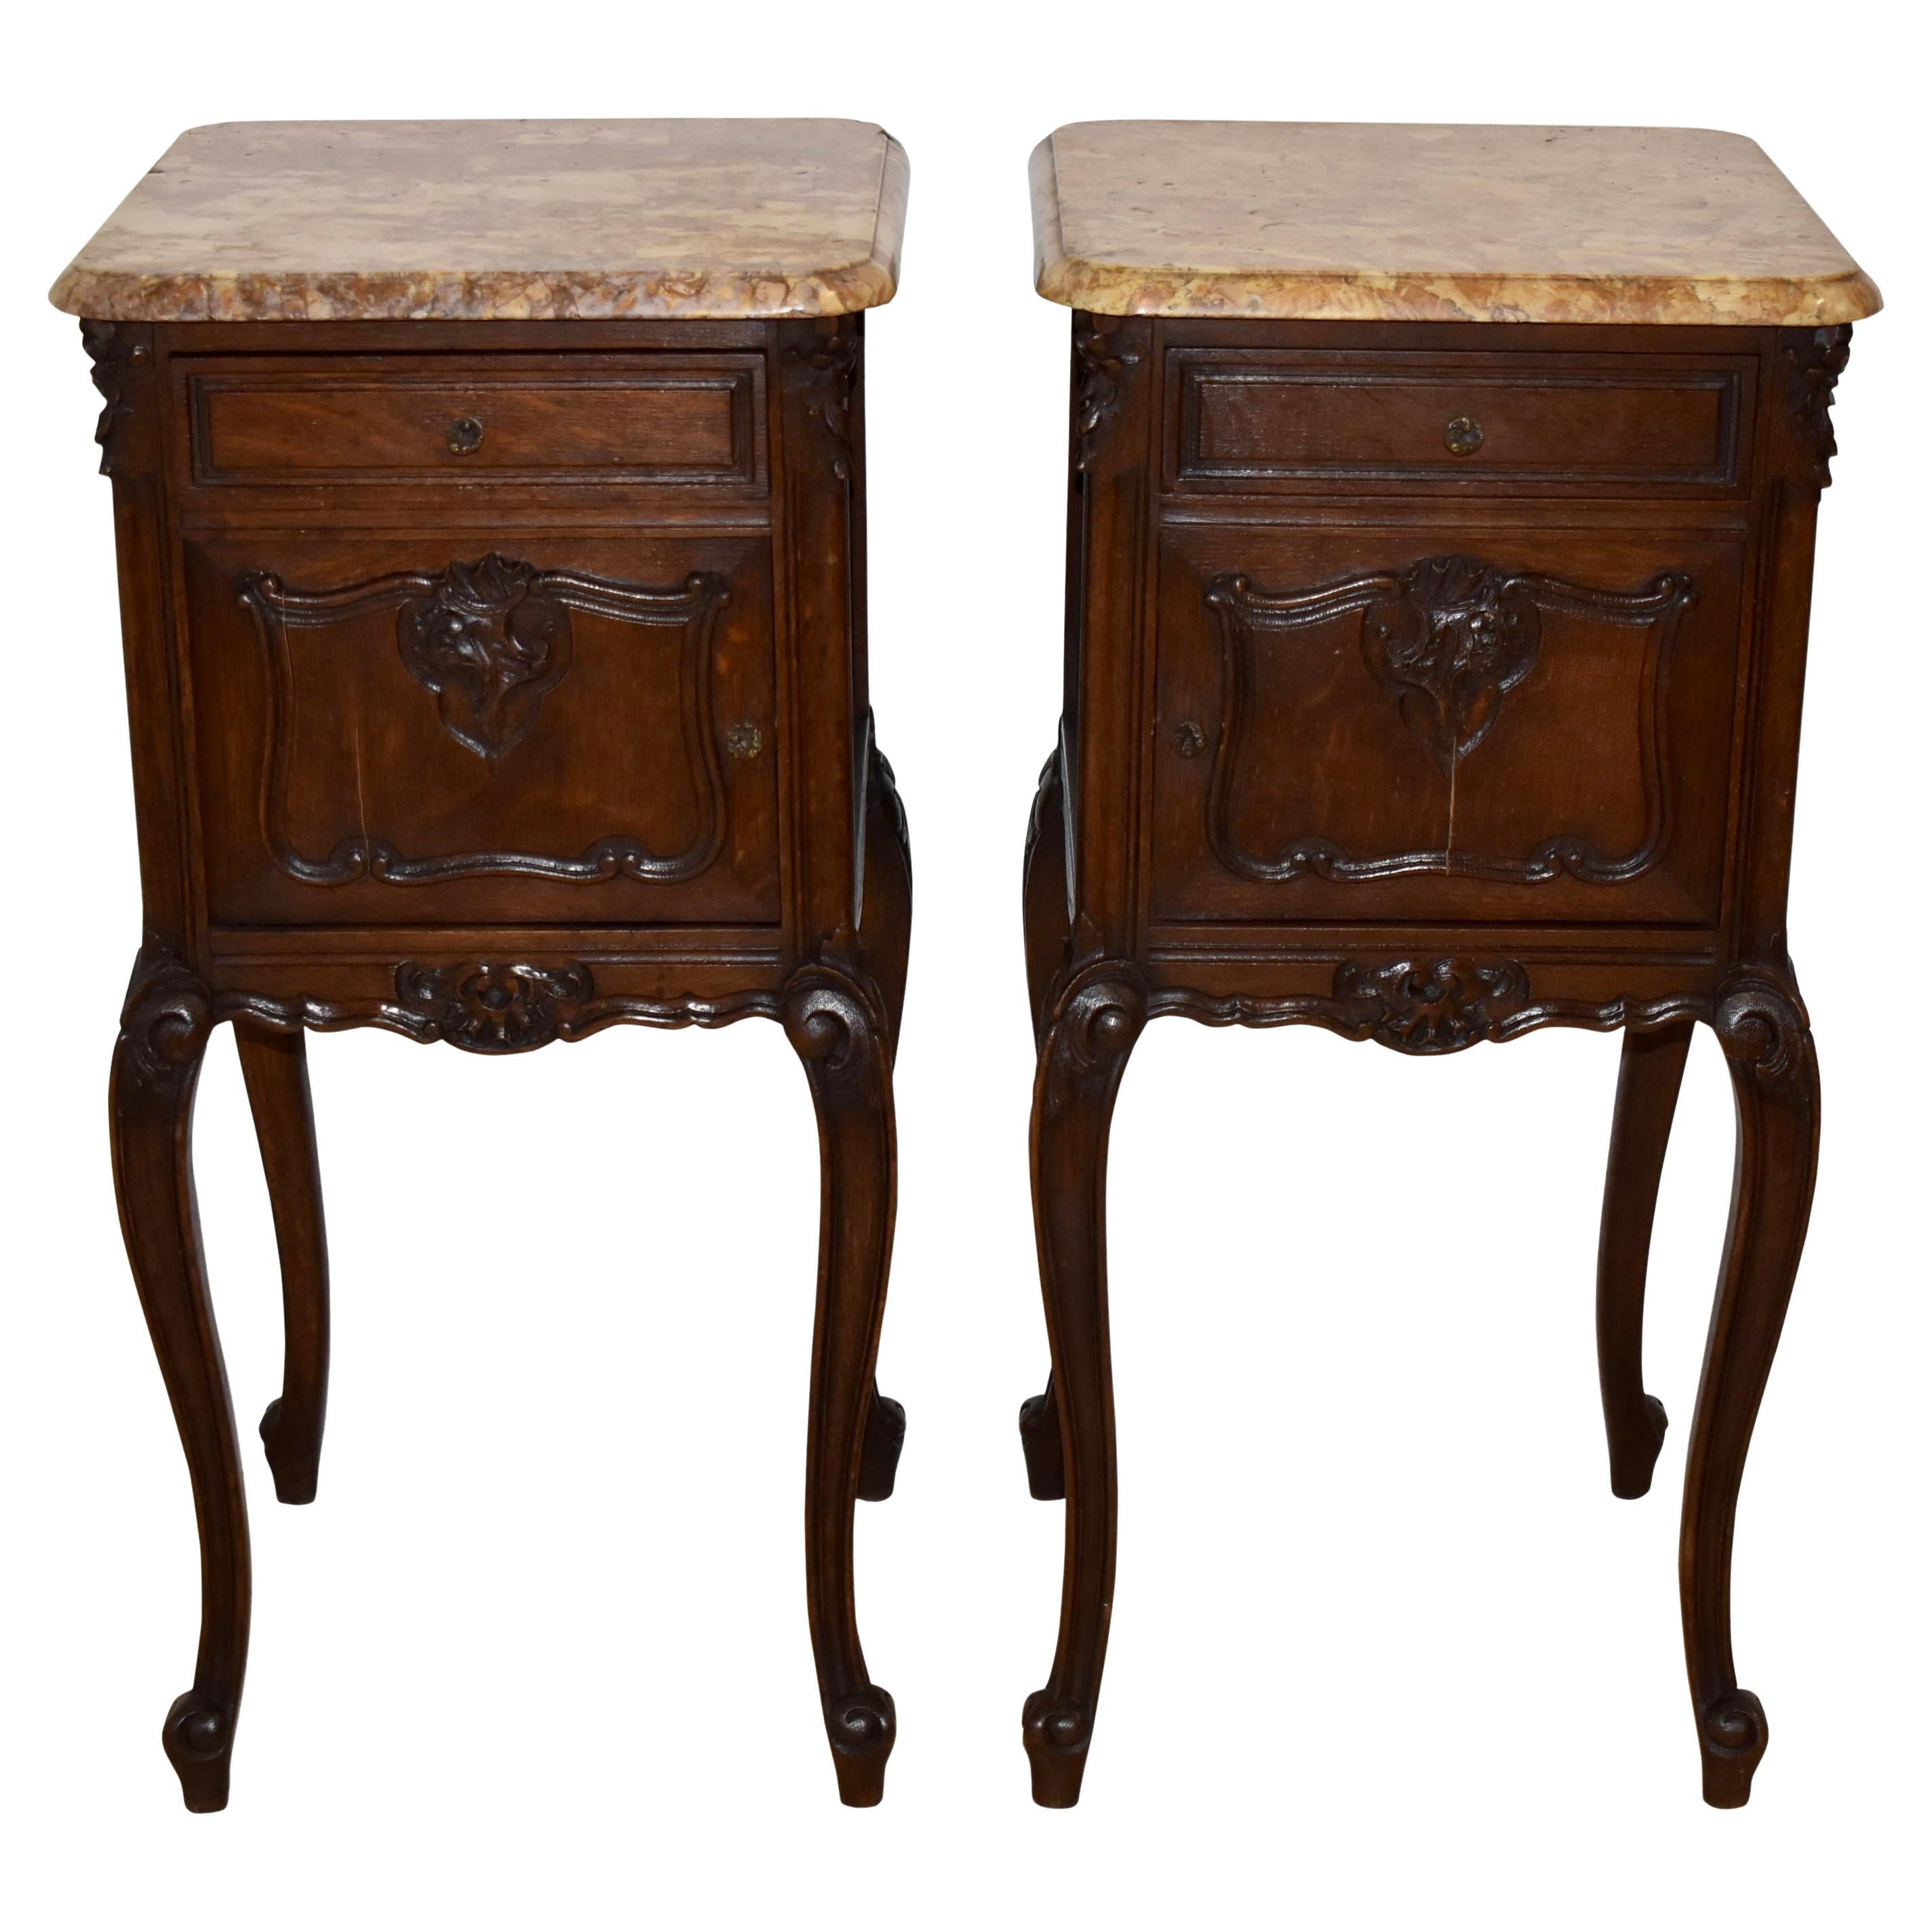 Pair of Carved Oak Nightstand Bedside Tables with Mable Tops, Circa 1900 For Sale